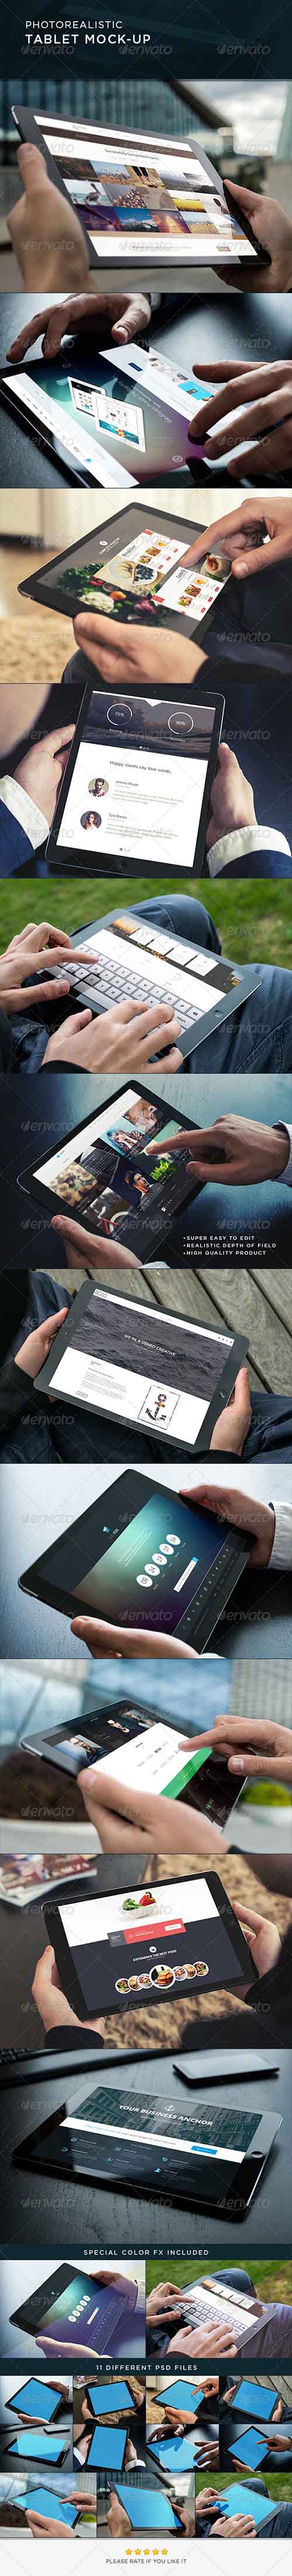 Graphicriver - Photorealistic Tablet Mock-Up